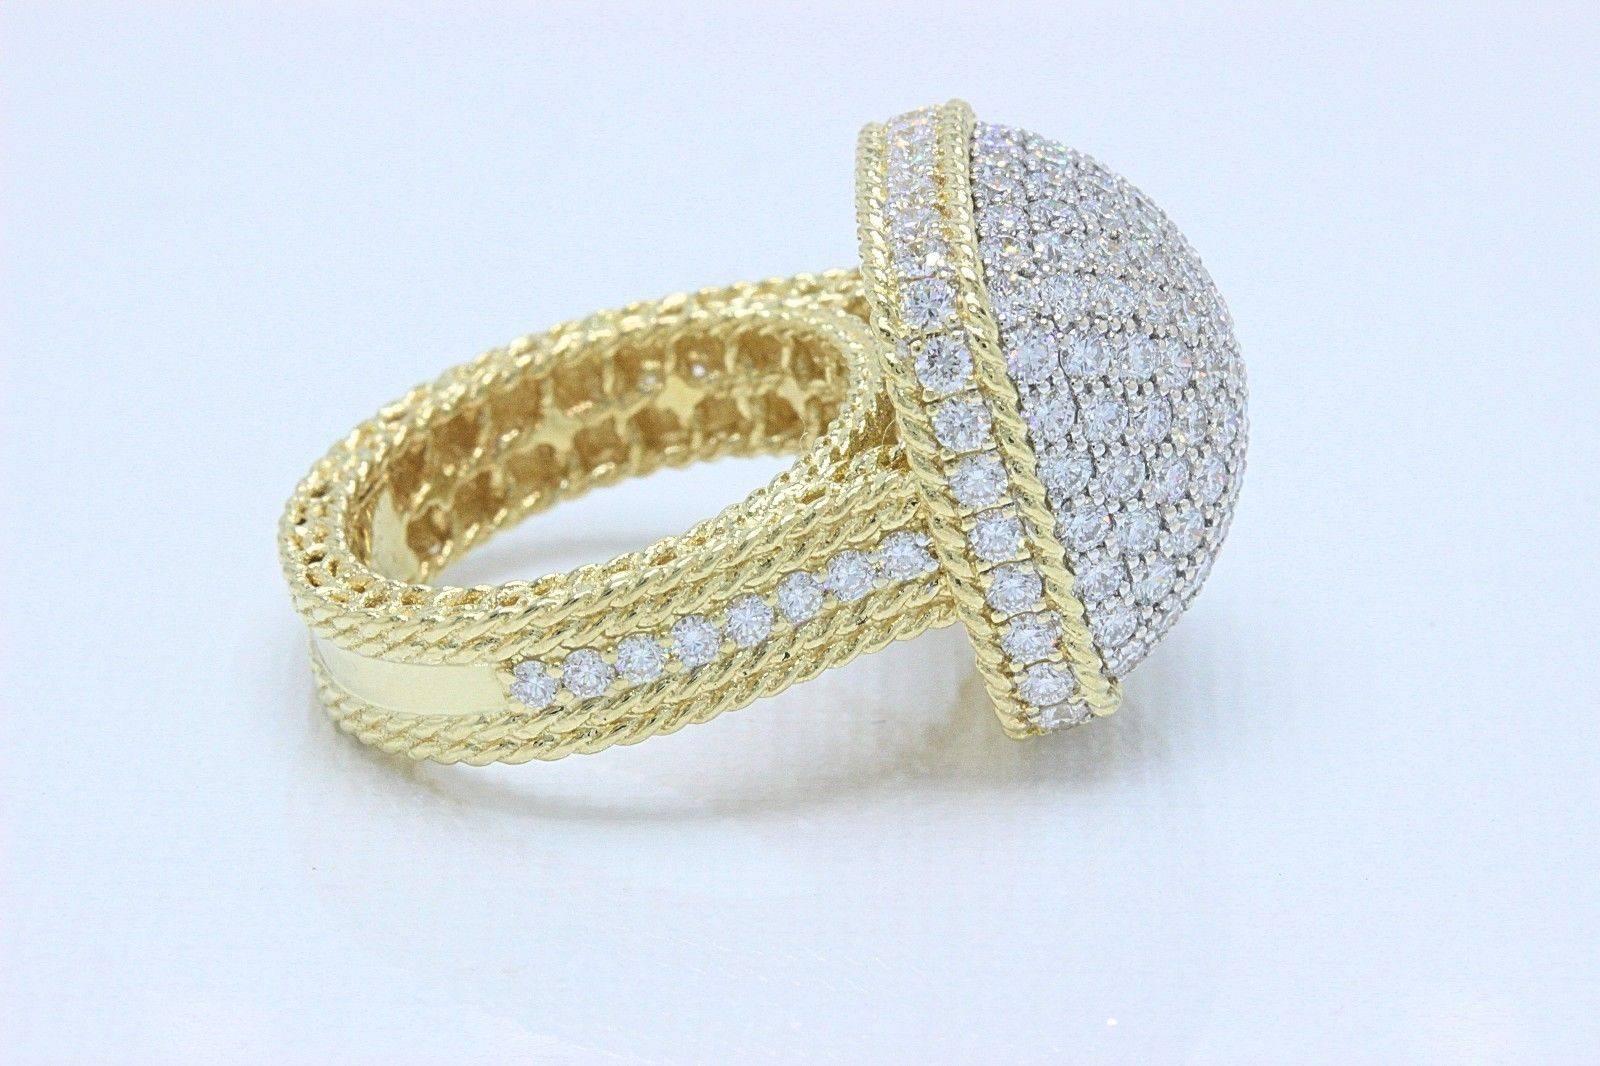 ROBERTO COIN
Style:  Barocco Collection Diamond Dome Ring
Metal:  Twisted 18KT Yellow Gold
Size:  6.5 - Sizable
Width:  Dome is 18 MM X 18 MM X 9 MM - Band is 5 MM 
Total Carat Weight:  3.30 TCW  Pave White Diamonds Dome & Trim at Shoulders
Diamond